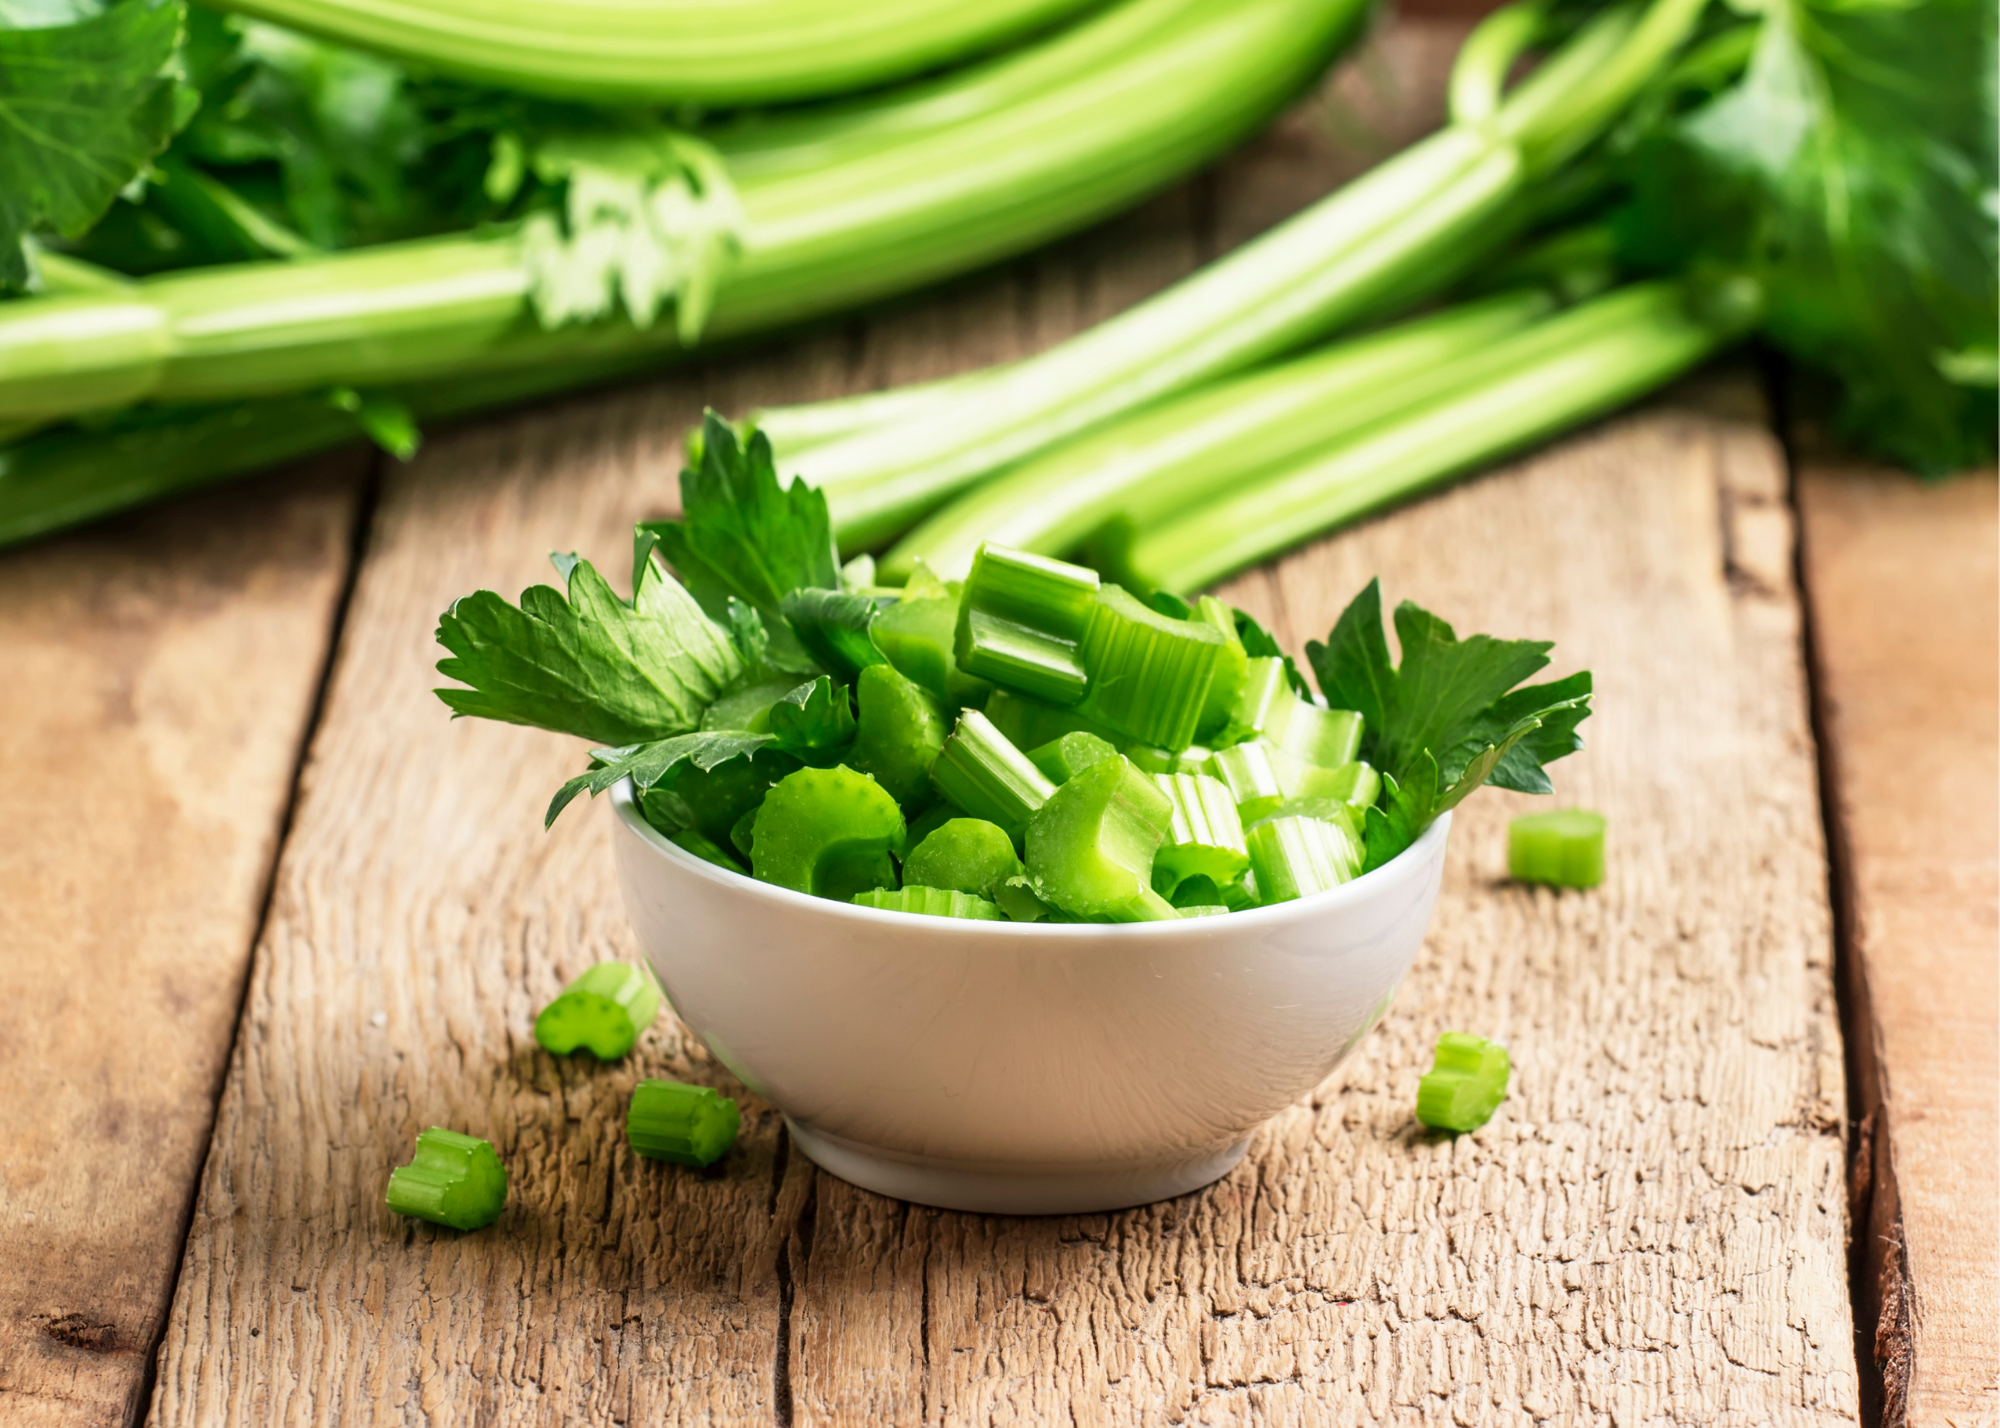 Celery stalks sit next to chopped celery and leaves in a white bowl.